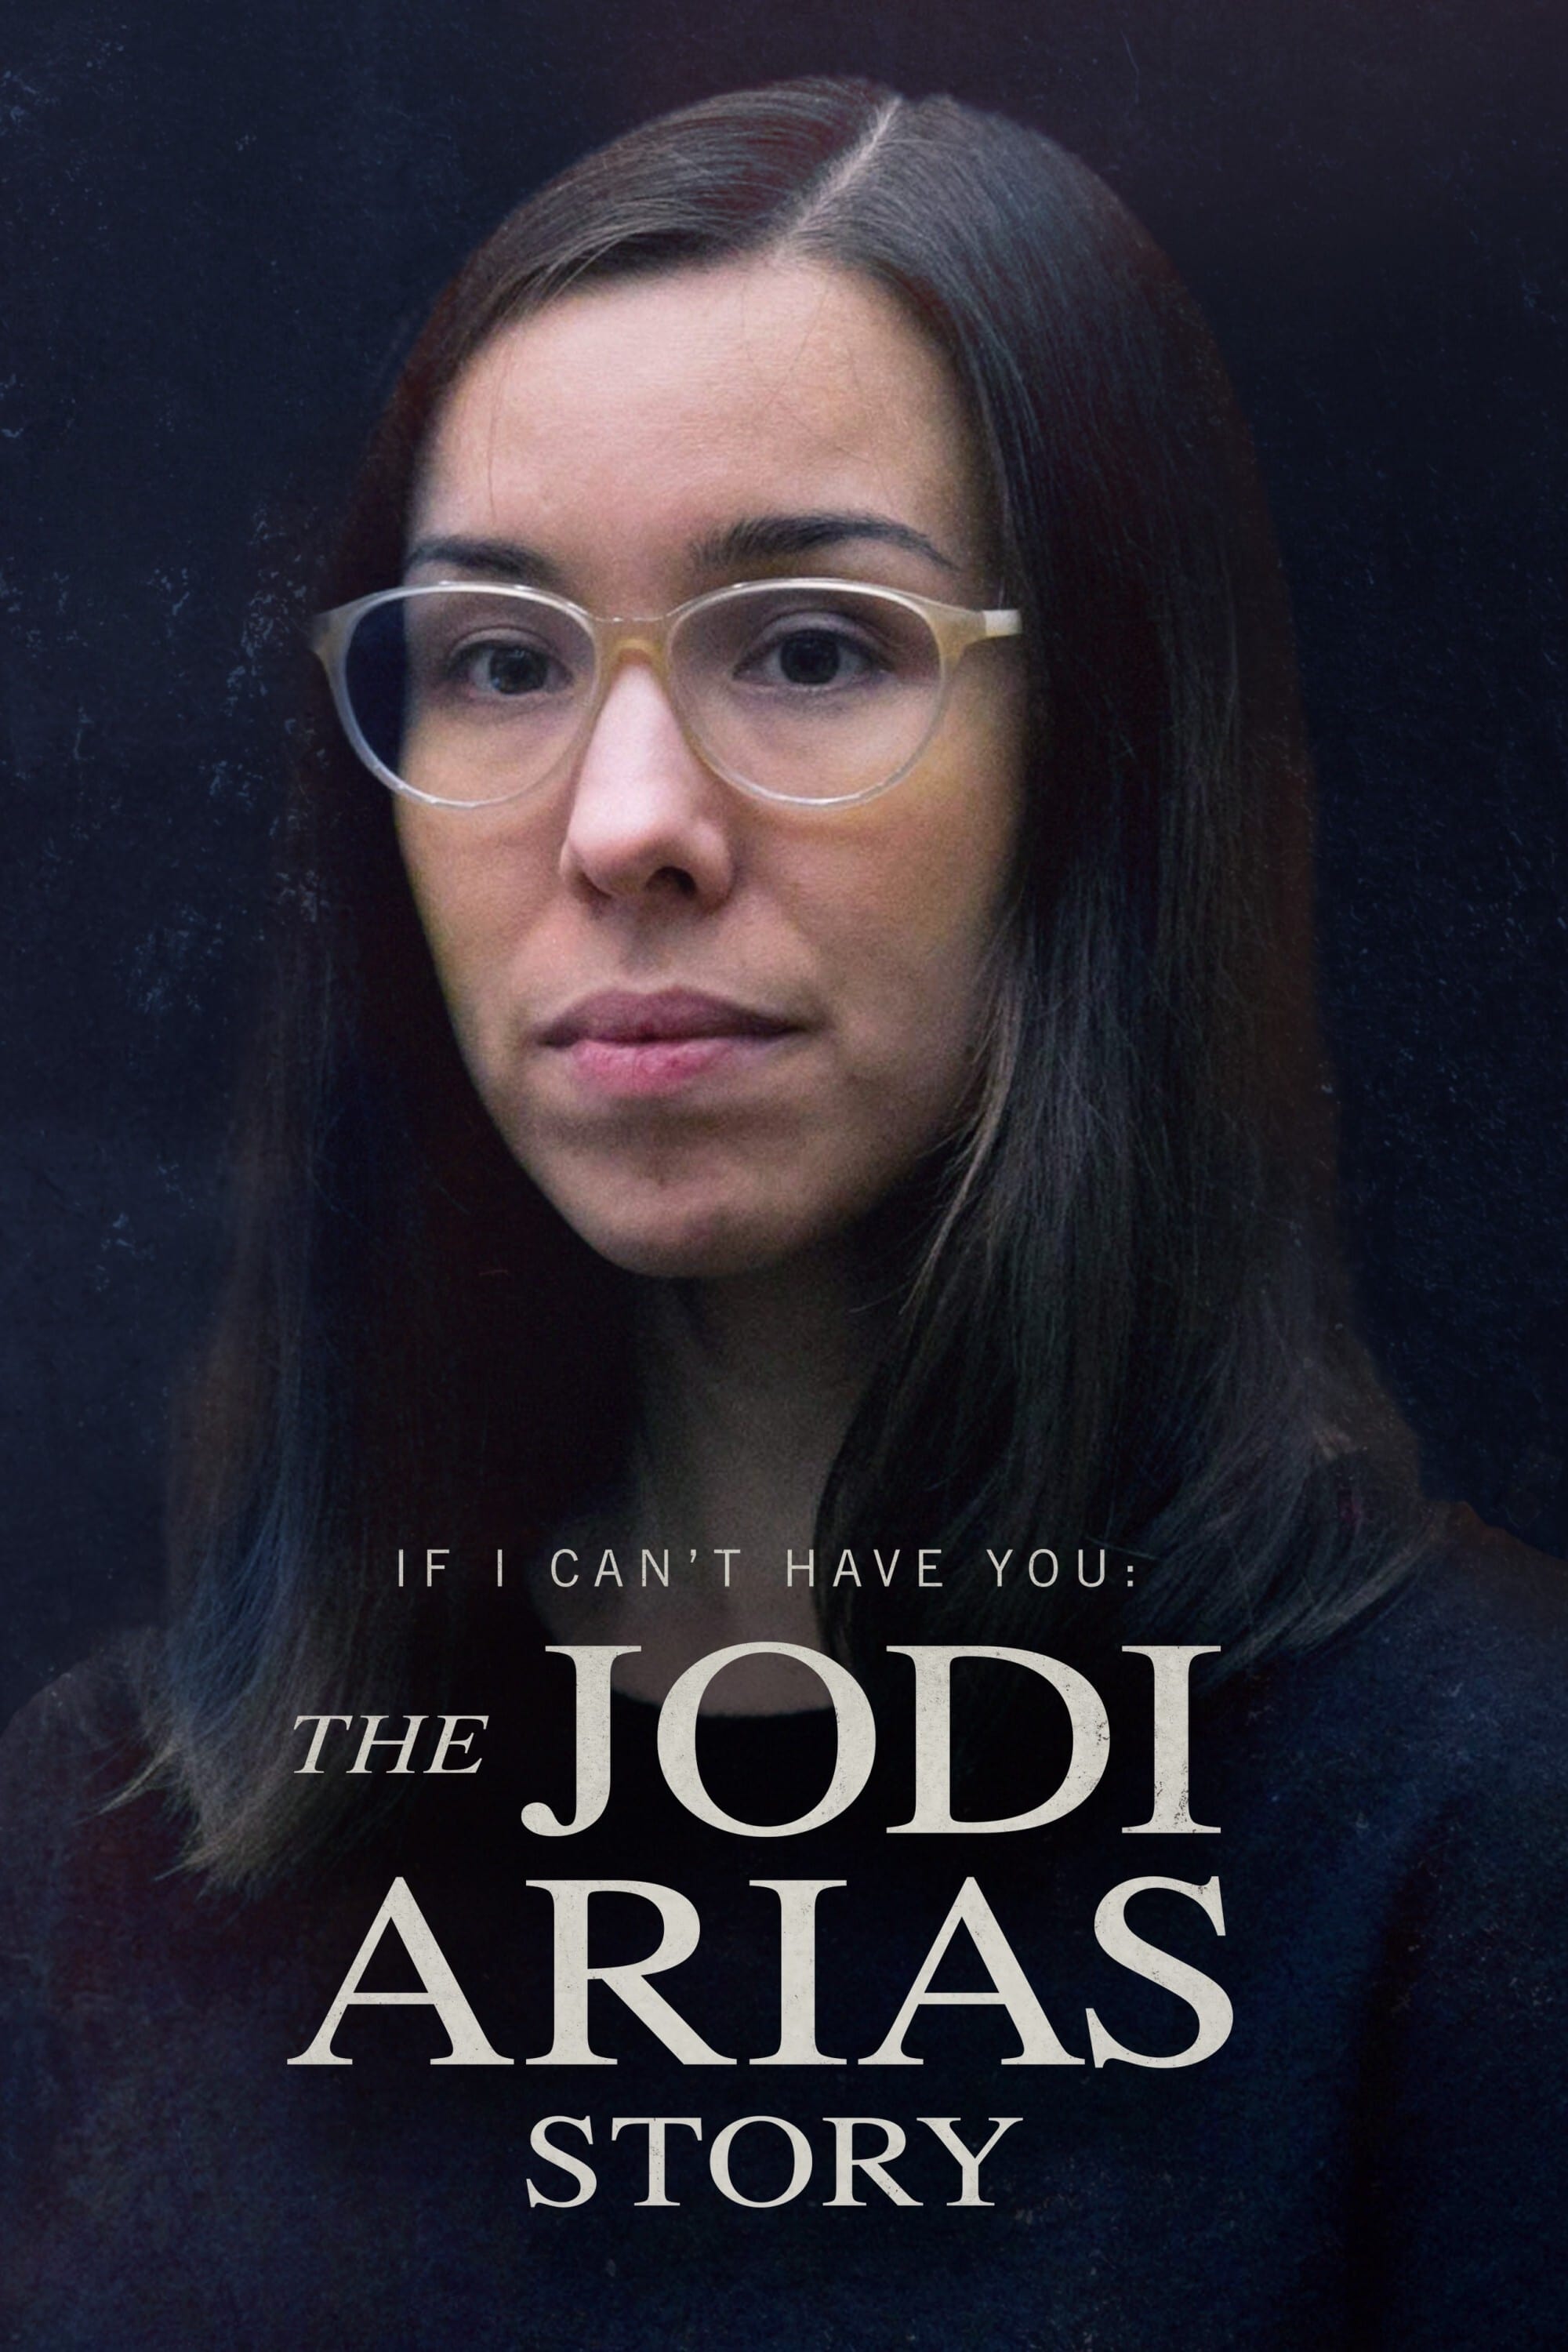 If I Can’t Have You: The Jodi Arias Story